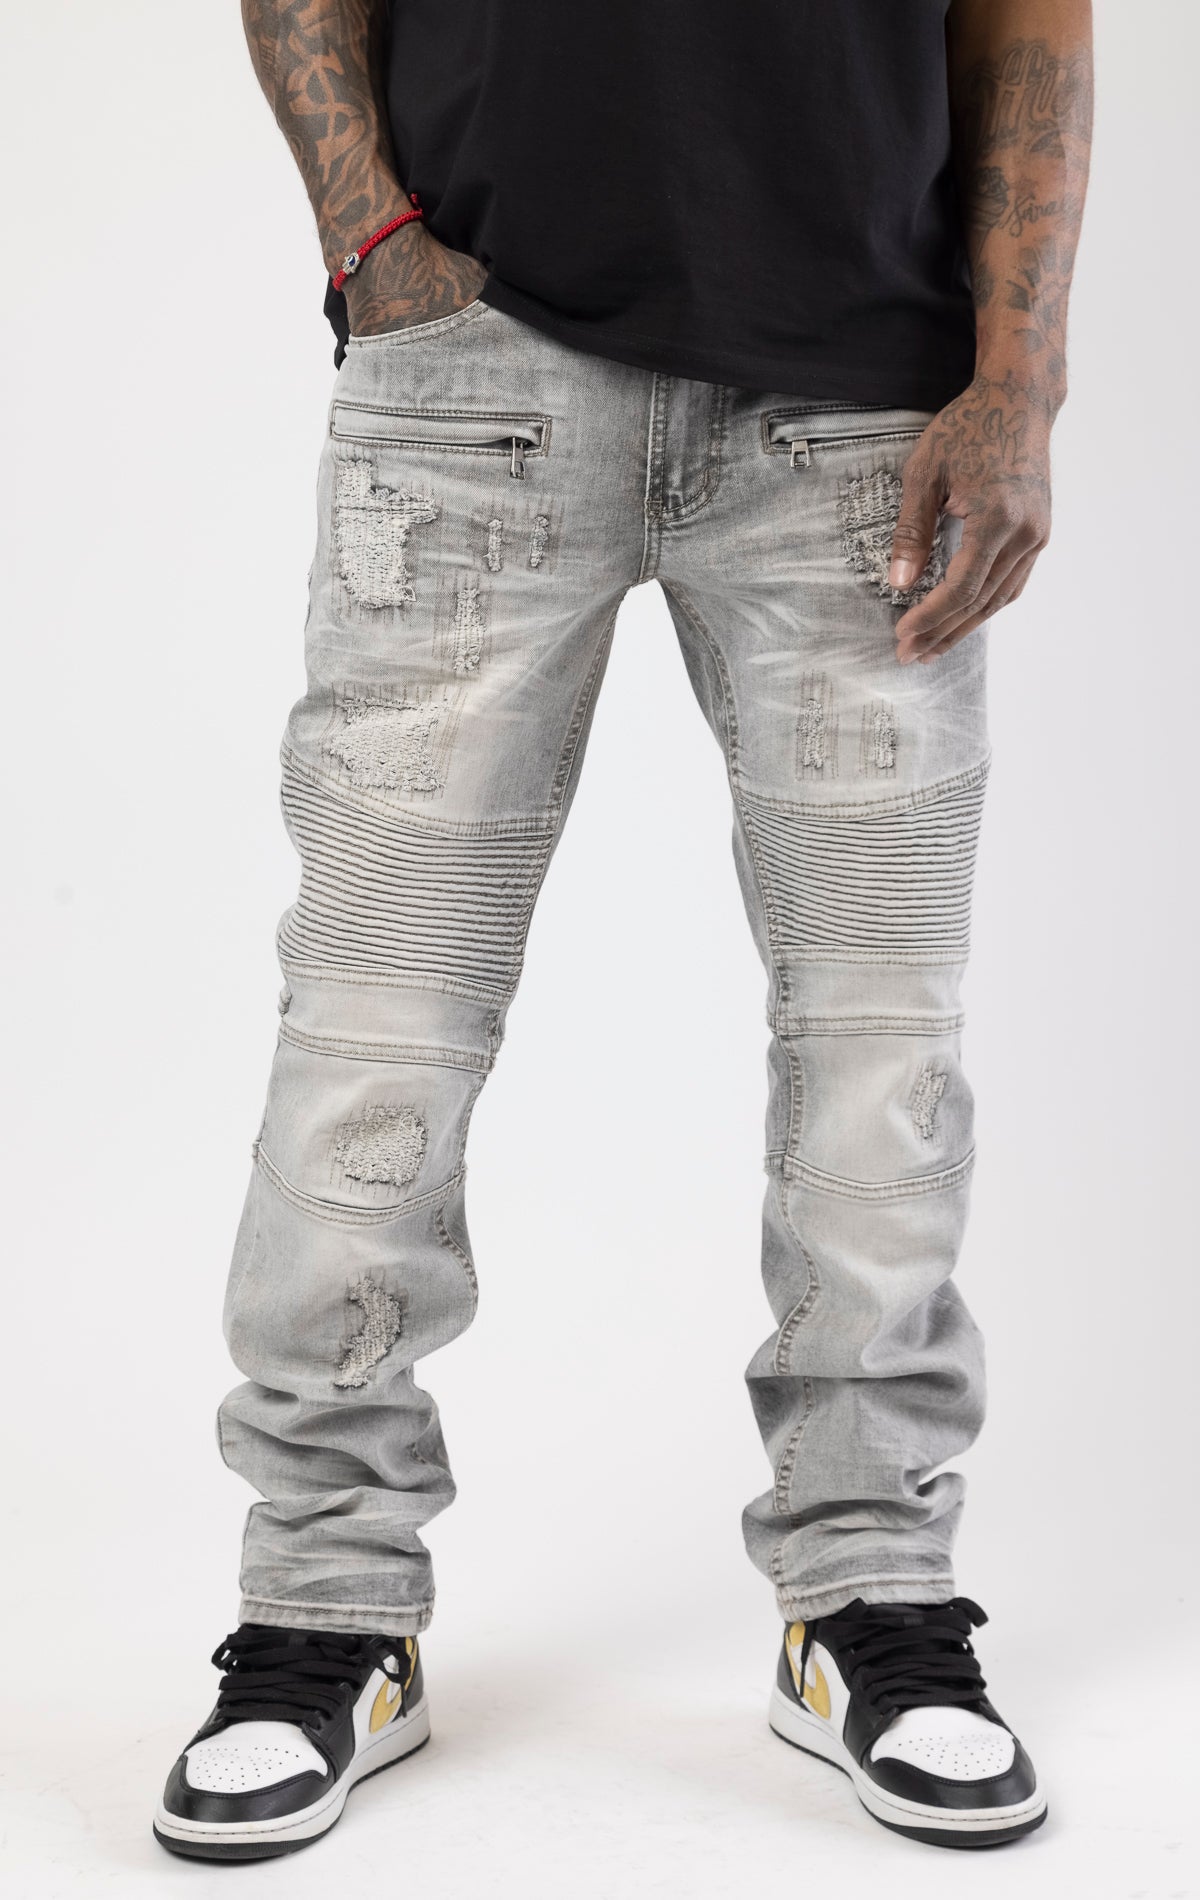 Gray high-quality denim made from 98% cotton and 2% spandex. With its rip and repair design and slim fit, it's the ultimate blend of style and comfort.